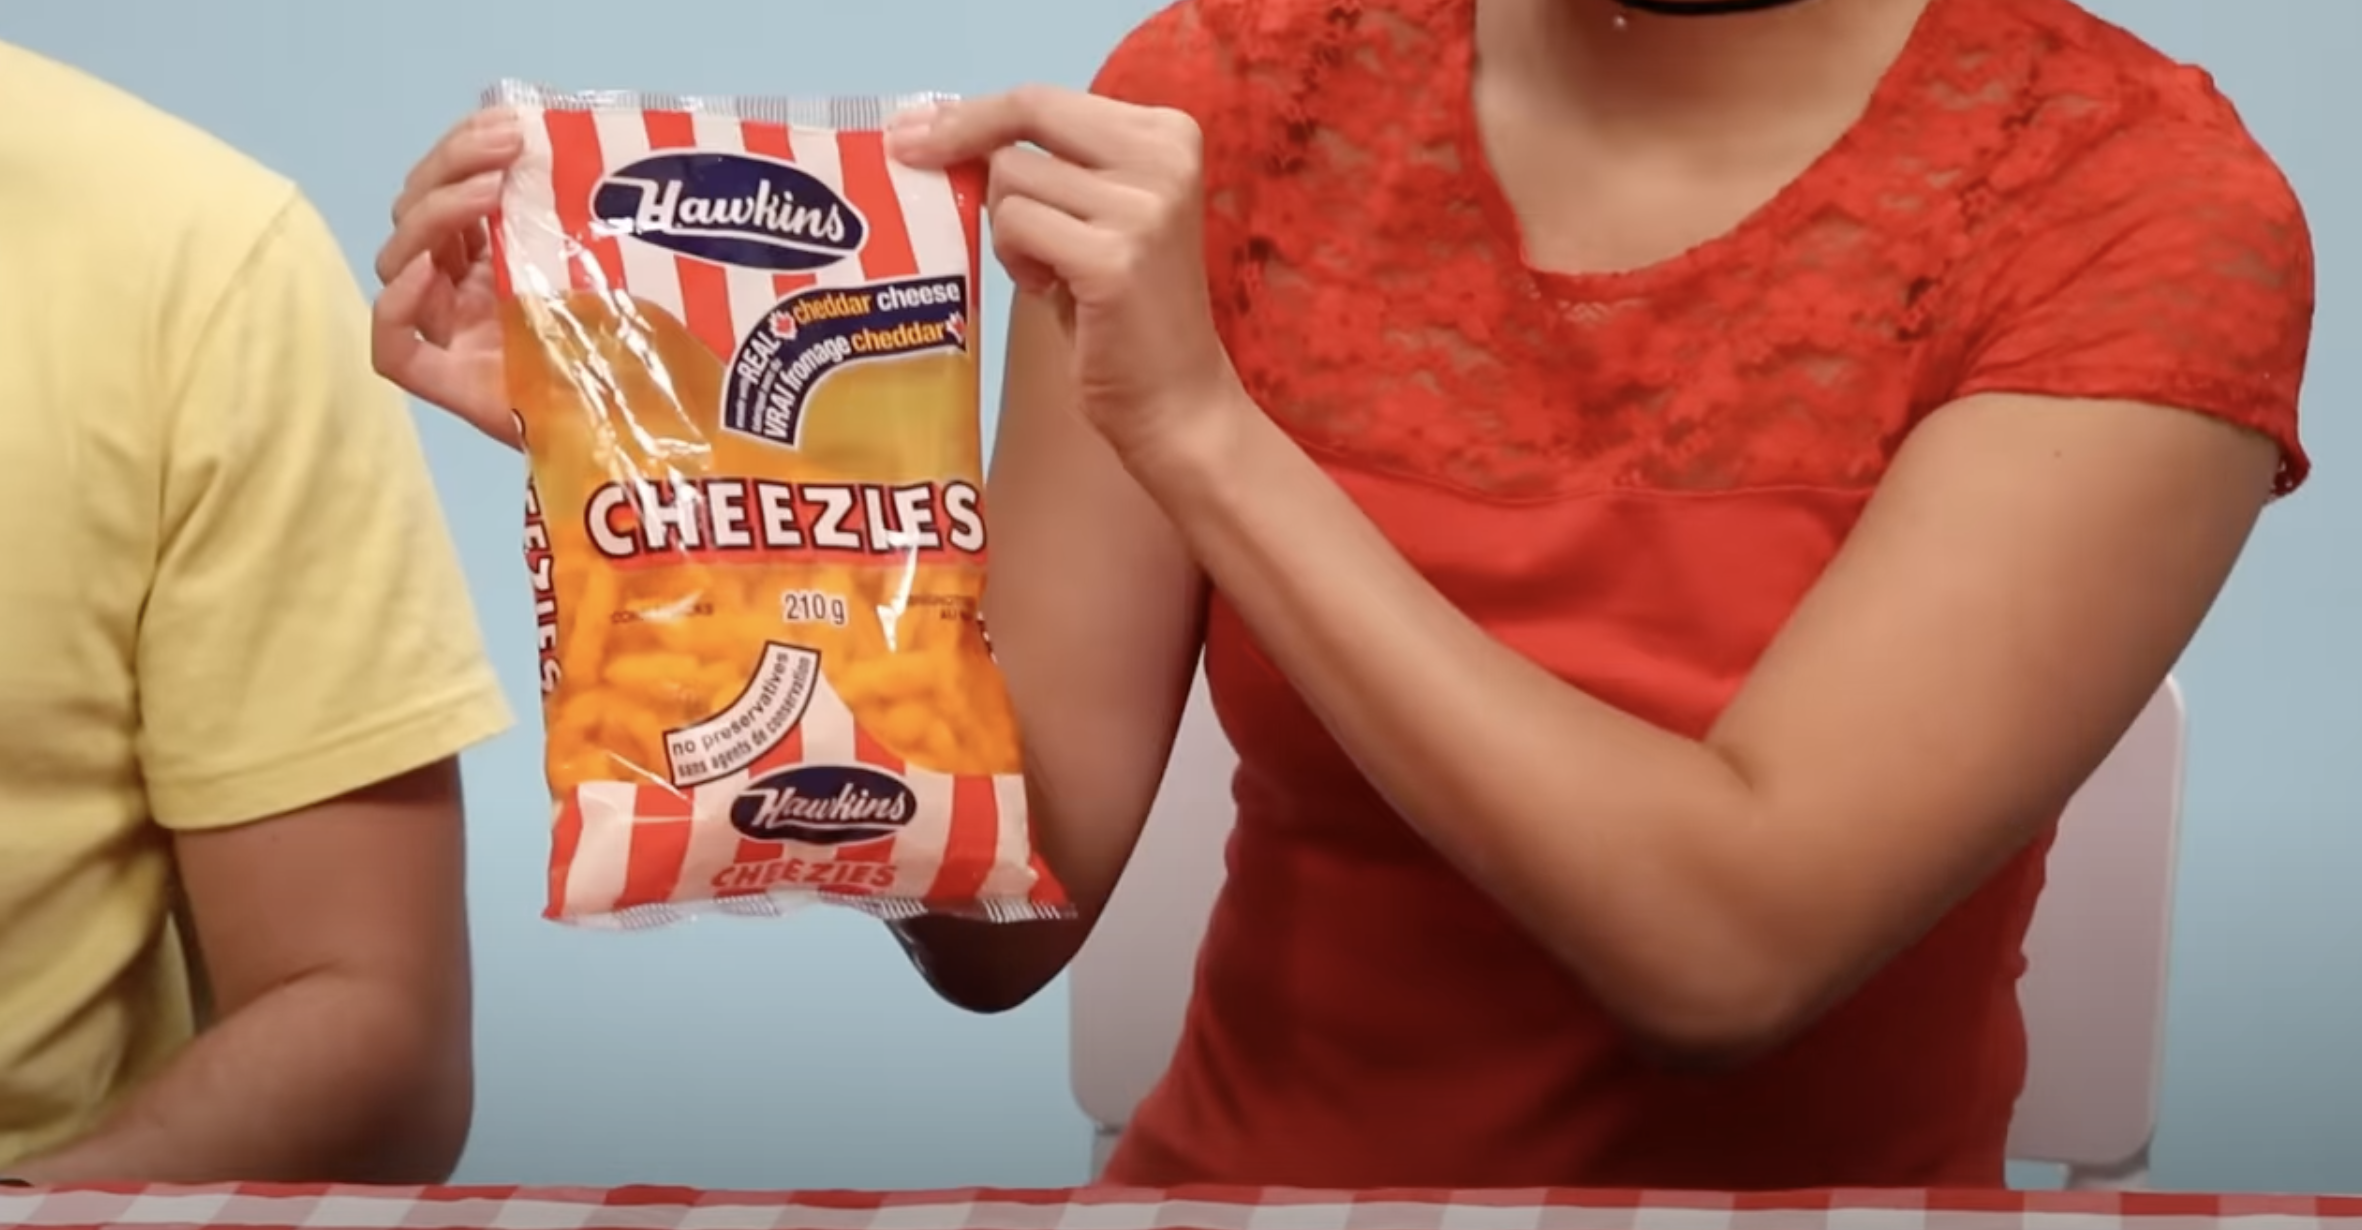 Person holding a bag of Hawkins Cheezies; another individual partially visible